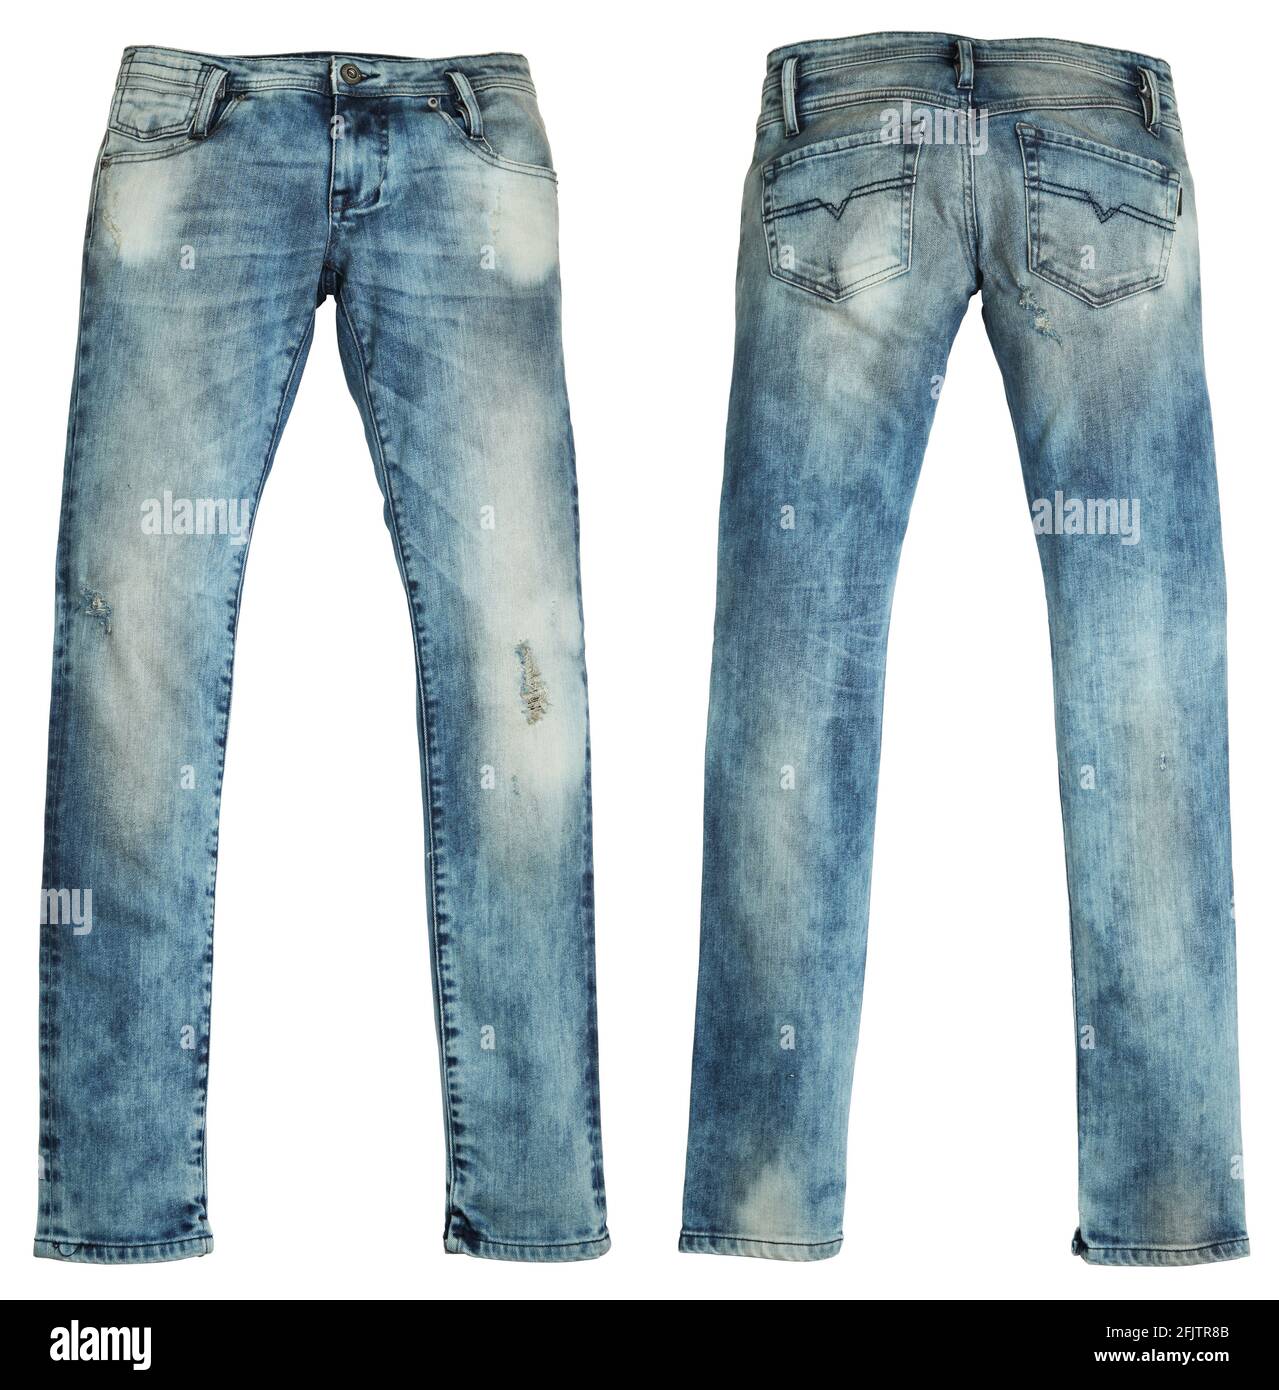 Front and back of jeans pants with clipping path Stock Photo - Alamy